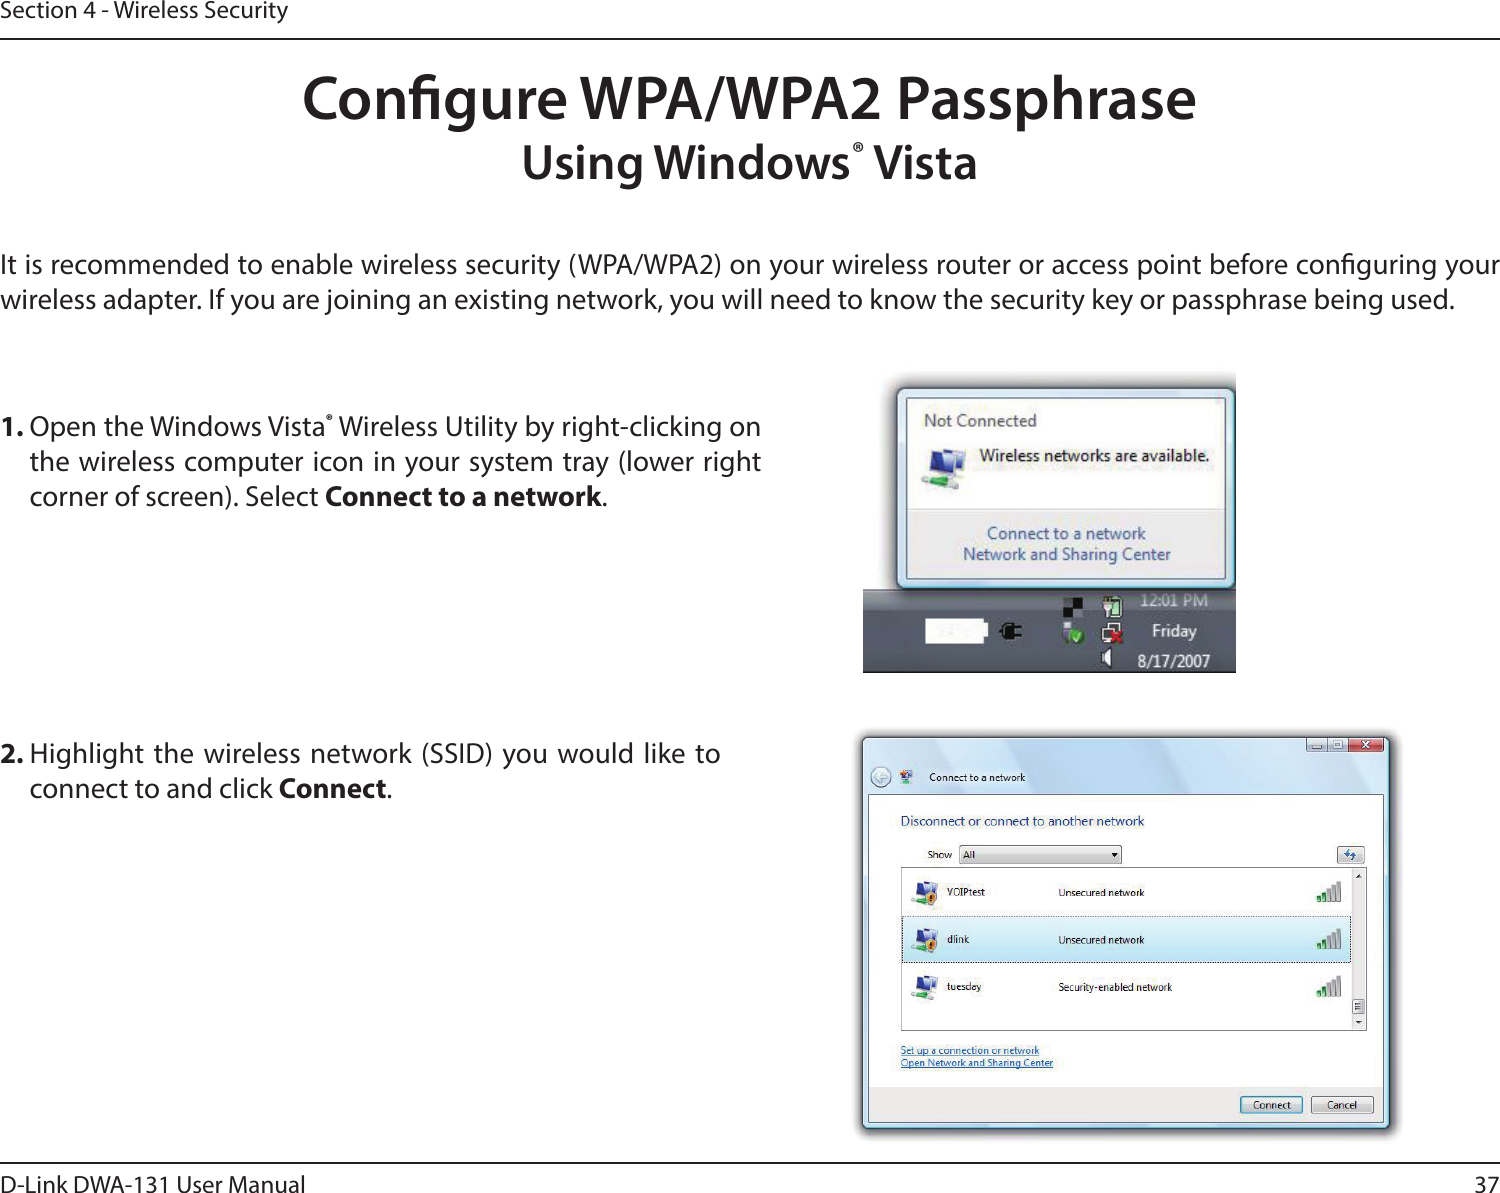 37D-Link DWA-131 User ManualSection 4 - Wireless SecurityCongure WPA/WPA2 PassphraseUsing Windows® VistaIt is recommended to enable wireless security (WPA/WPA2) on your wireless router or access point before conguring your wireless adapter. If you are joining an existing network, you will need to know the security key or passphrase being used.2. Highlight the  wireless network (SSID) you would like  to connect to and click Connect.1. Open the Windows Vista® Wireless Utility by right-clicking on the wireless computer icon in your system tray (lower right corner of screen). Select Connect to a network. 